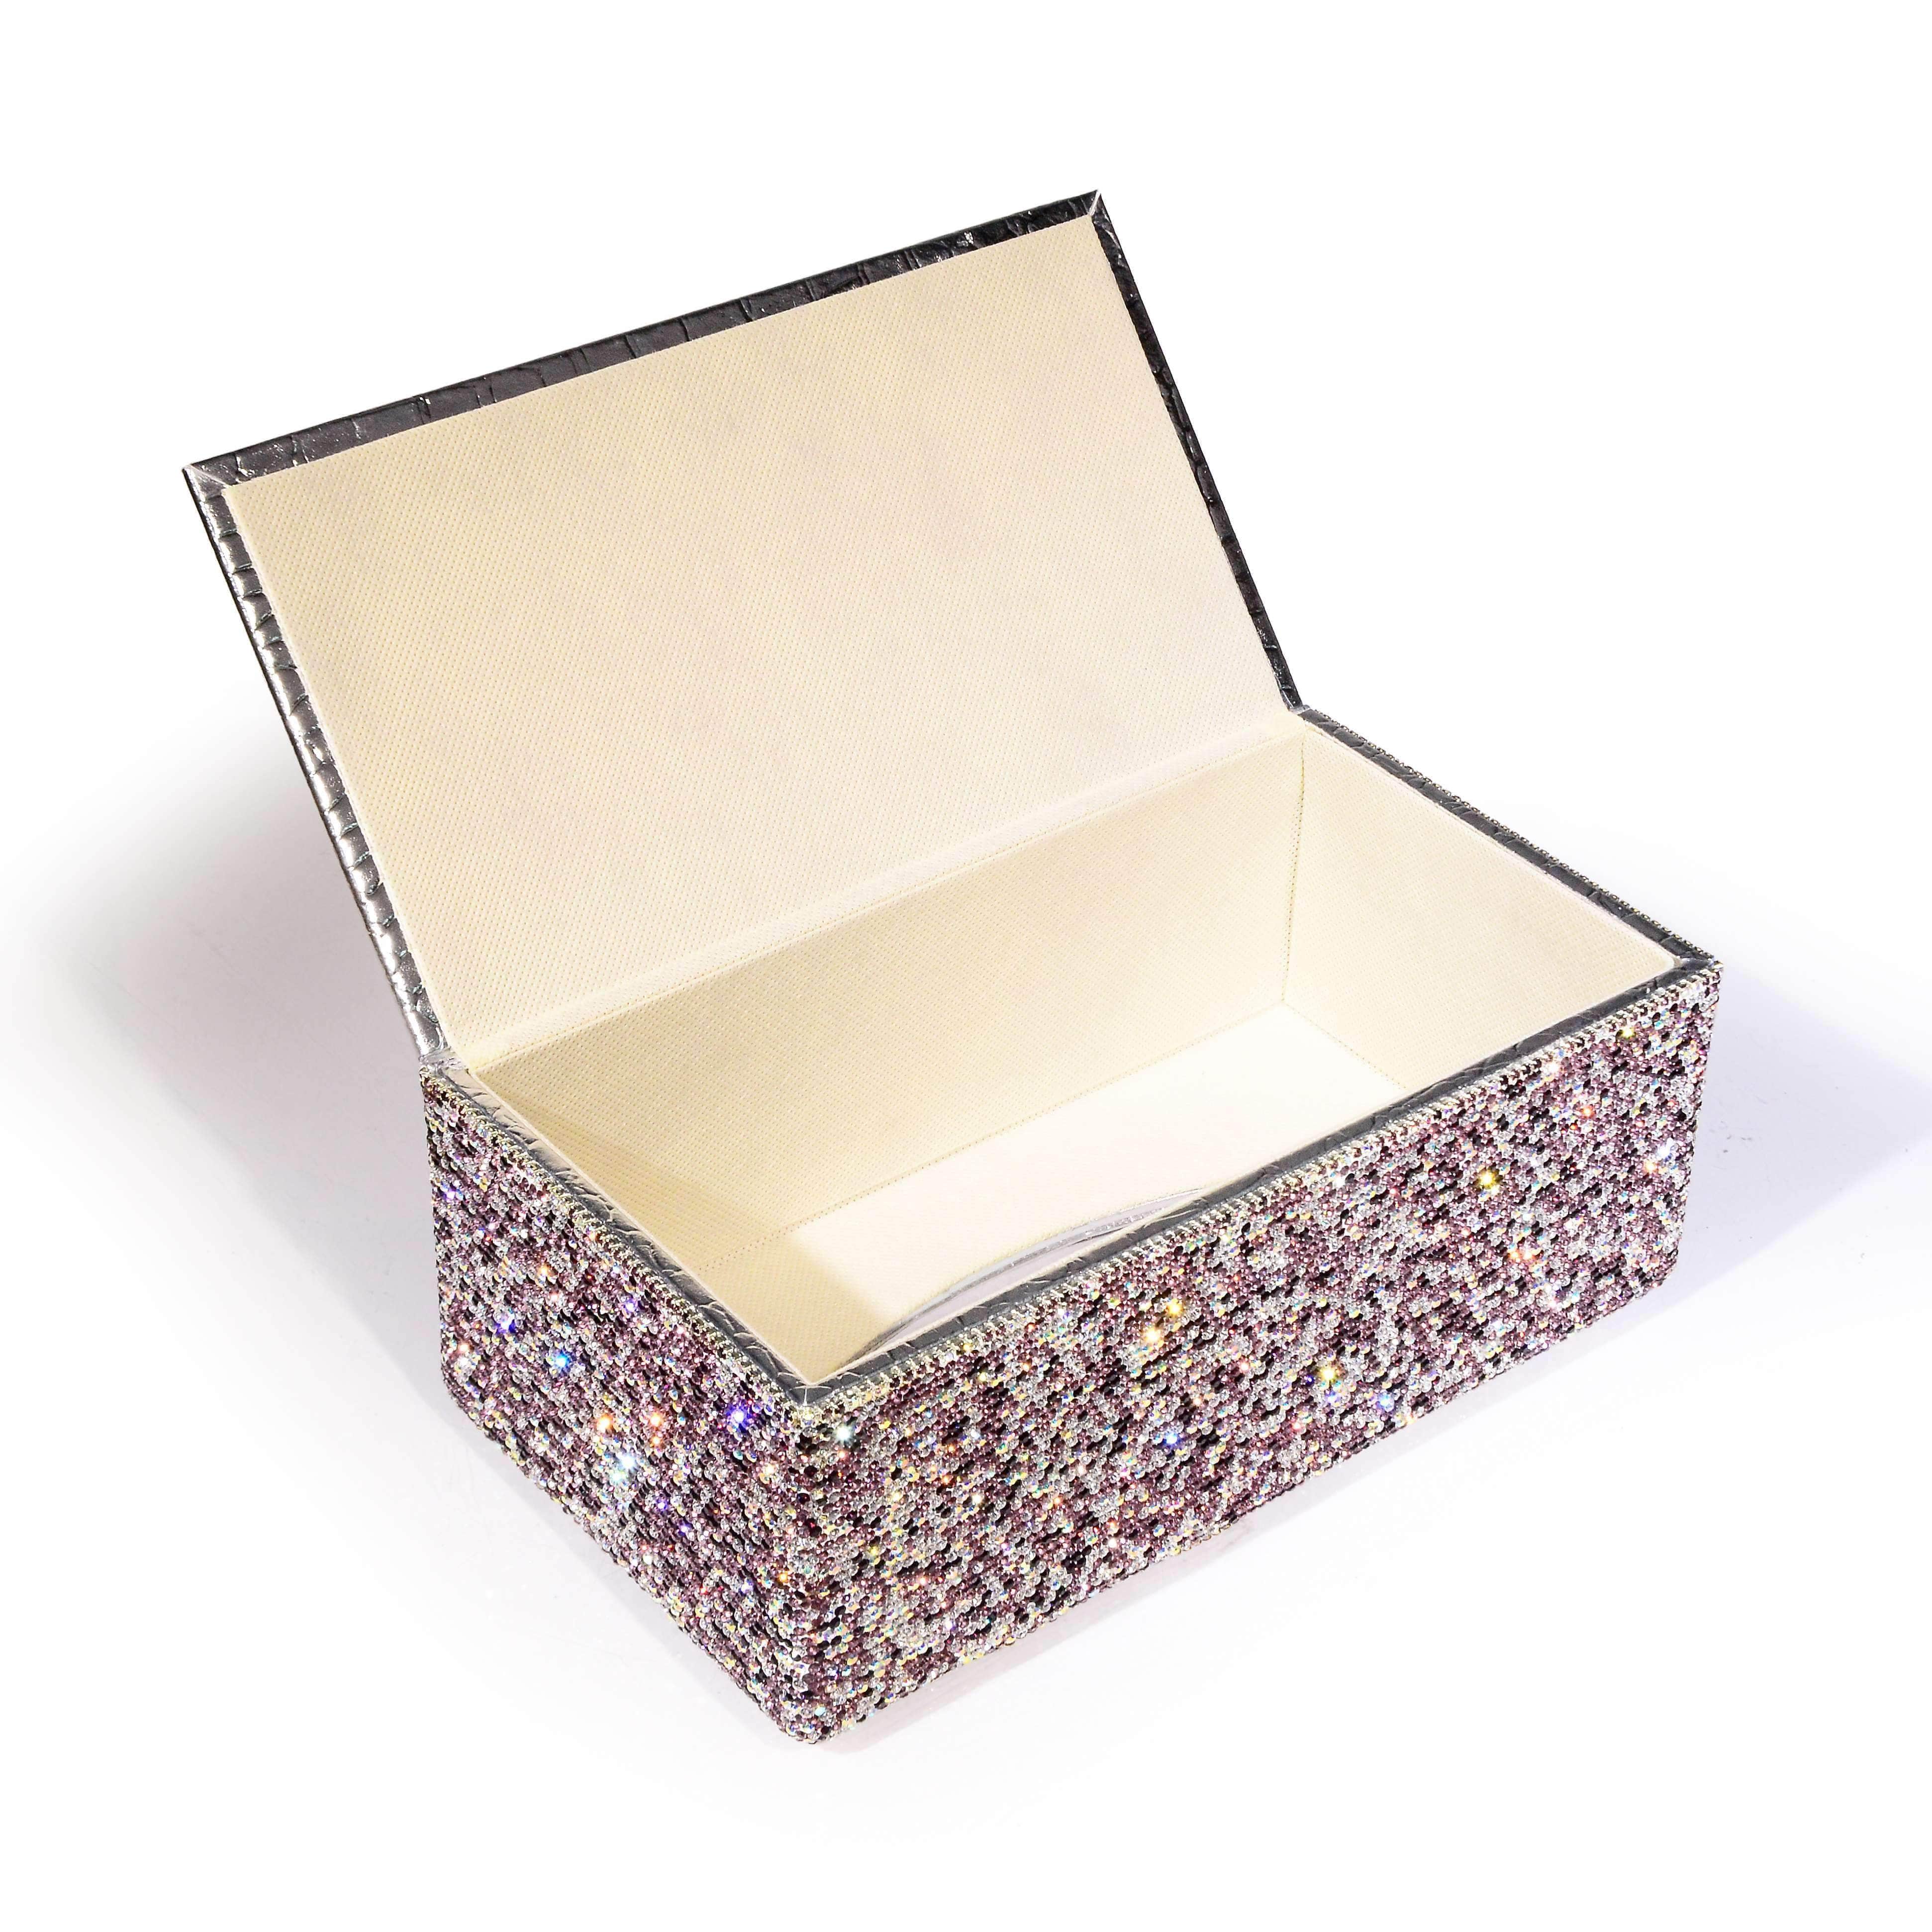 Kalifano Jeweled Accessories STB400-PE - Tissue Box made w/ Crystals STB400-PE